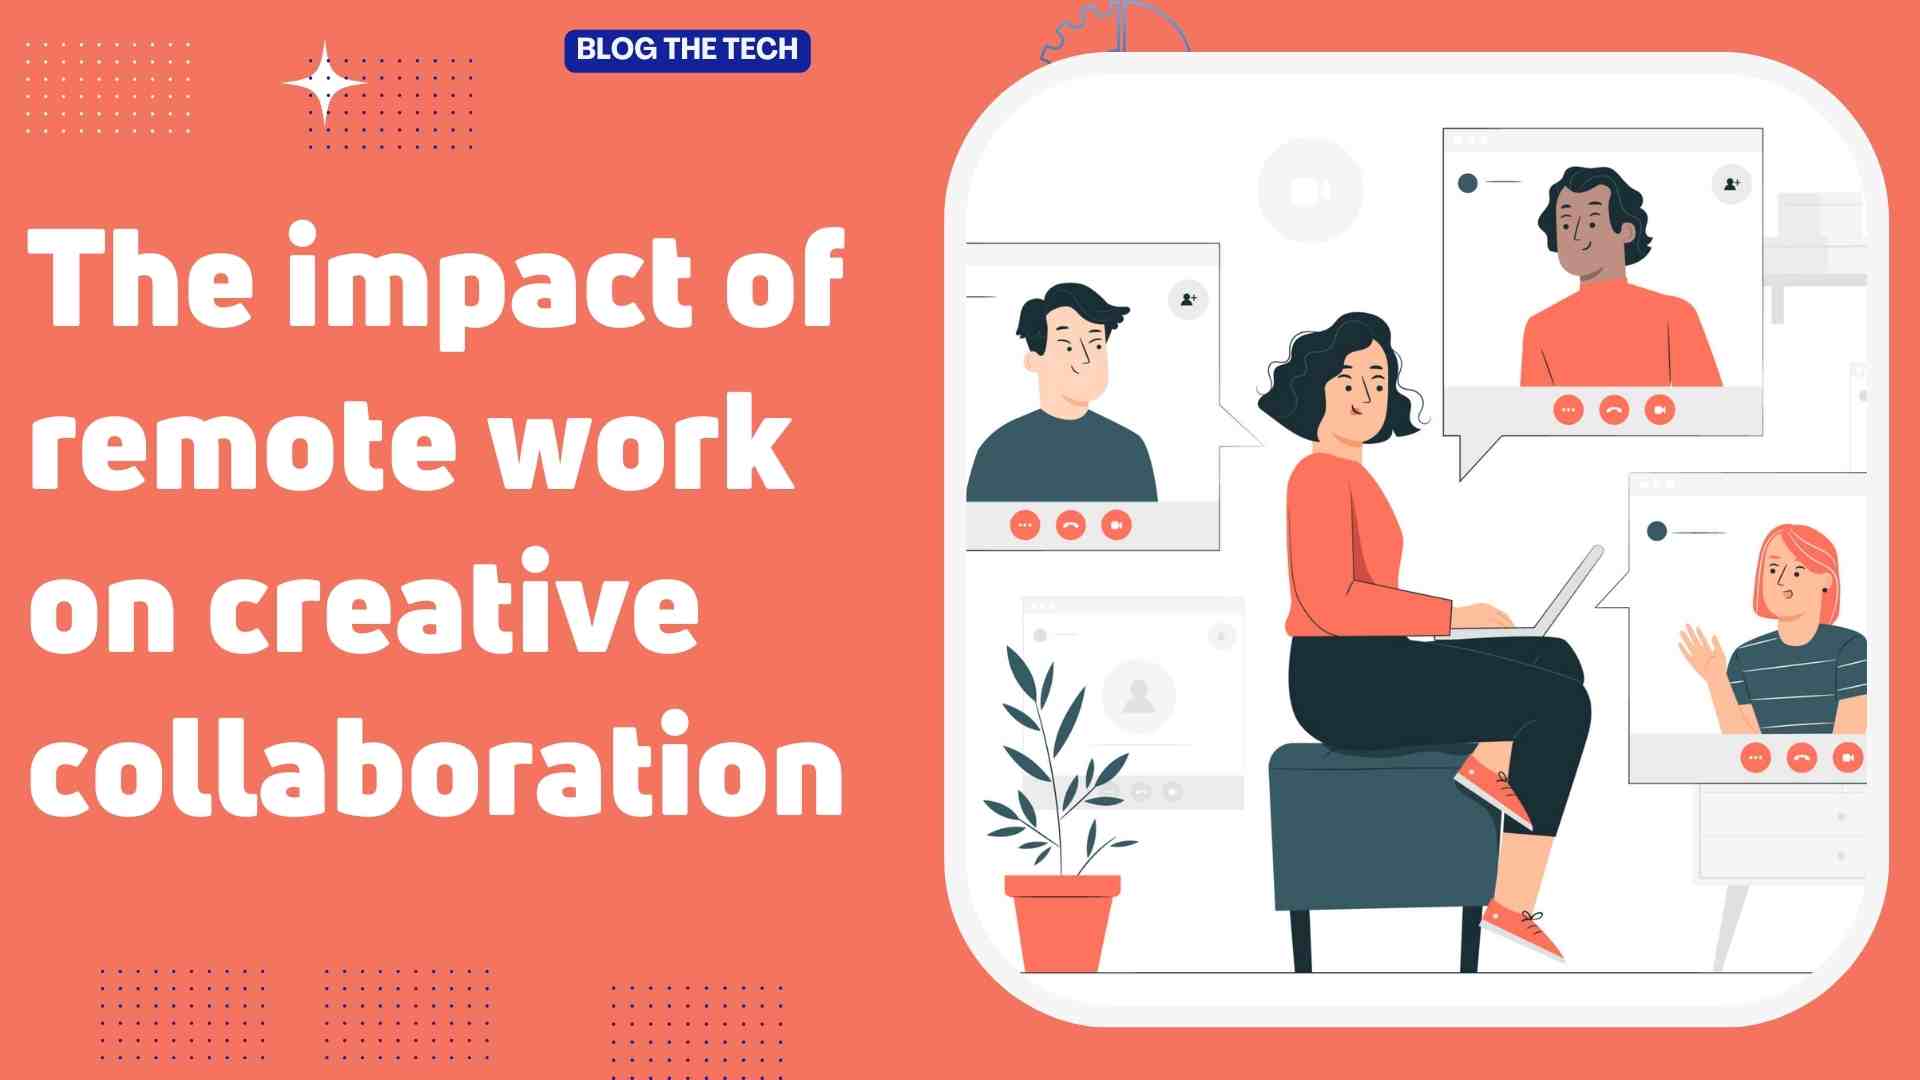 The impact of remote work on creative collaboration